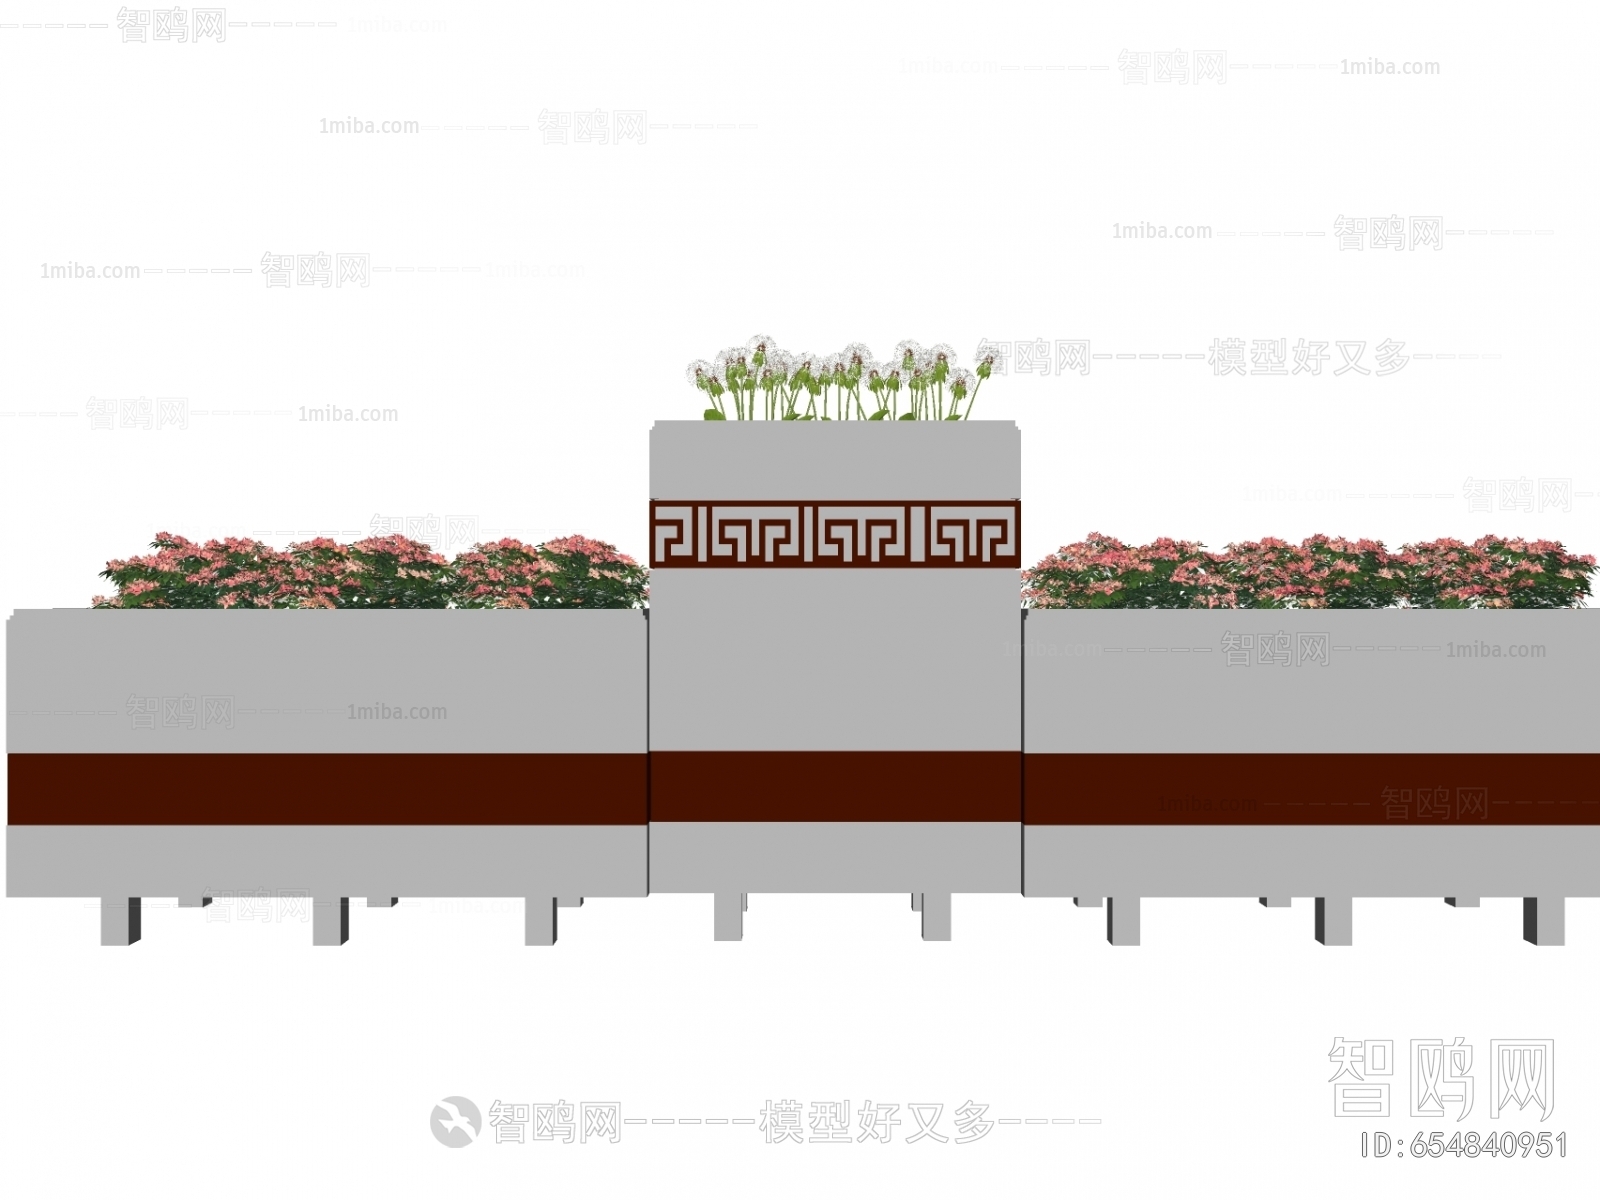 Chinese Style Flower Bed, Flower Bowl, Flower Box